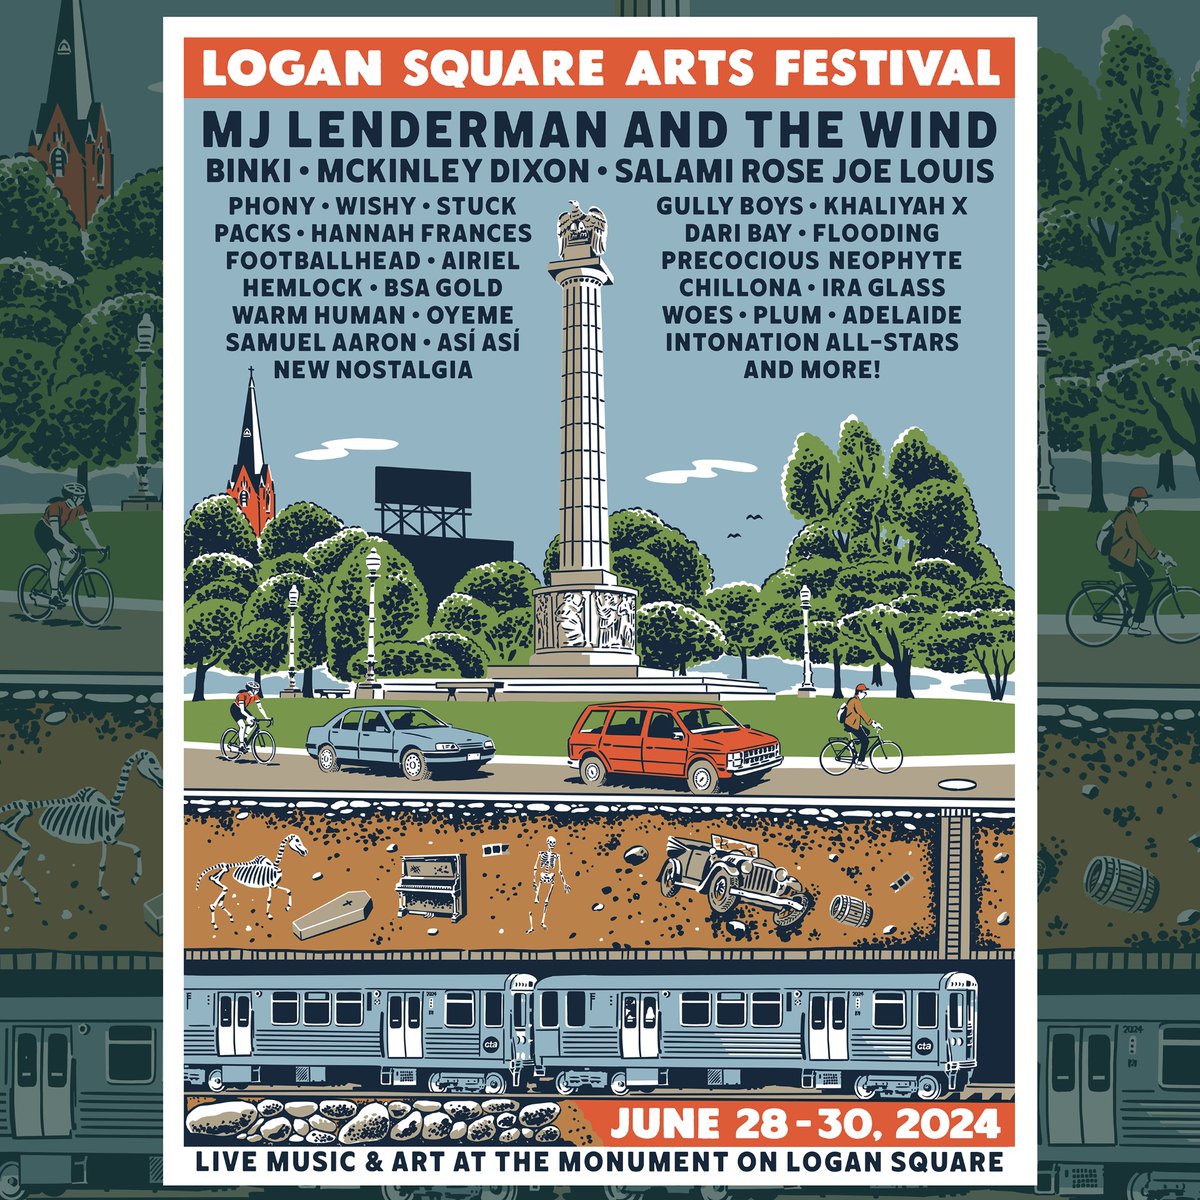 playing @LoganSqArtsFest this summer ☀️ more info + save the date: link.dice.fm/Q4e05d6adf88